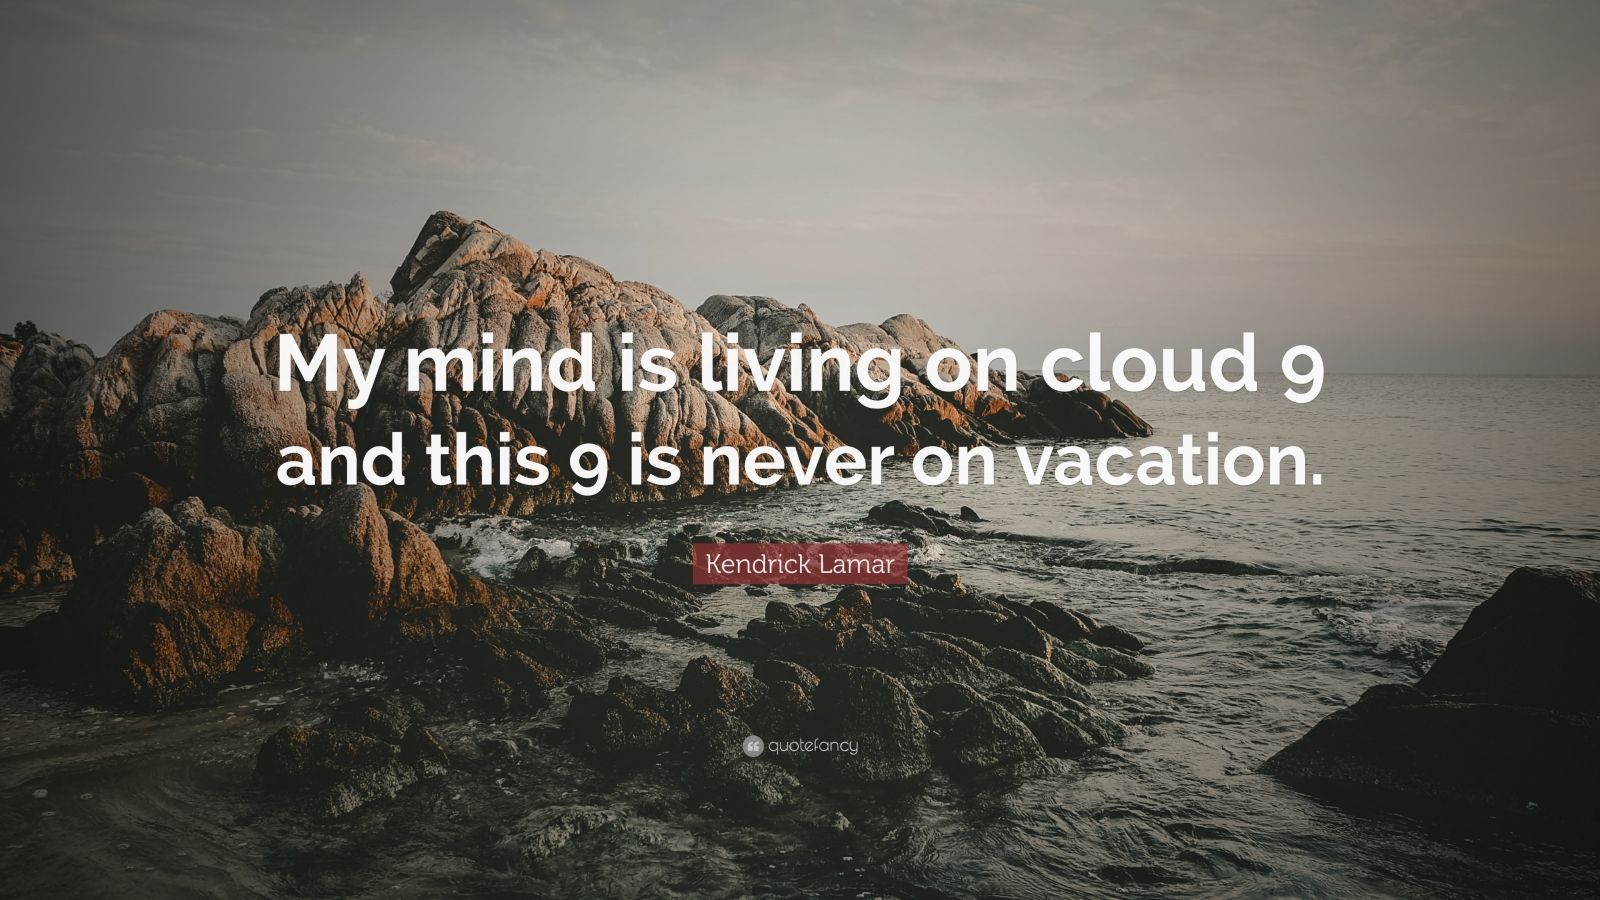 Kendrick Lamar Quote: “My mind is living on cloud 9 and this 9 is never on vacation.” (9 wallpaper)